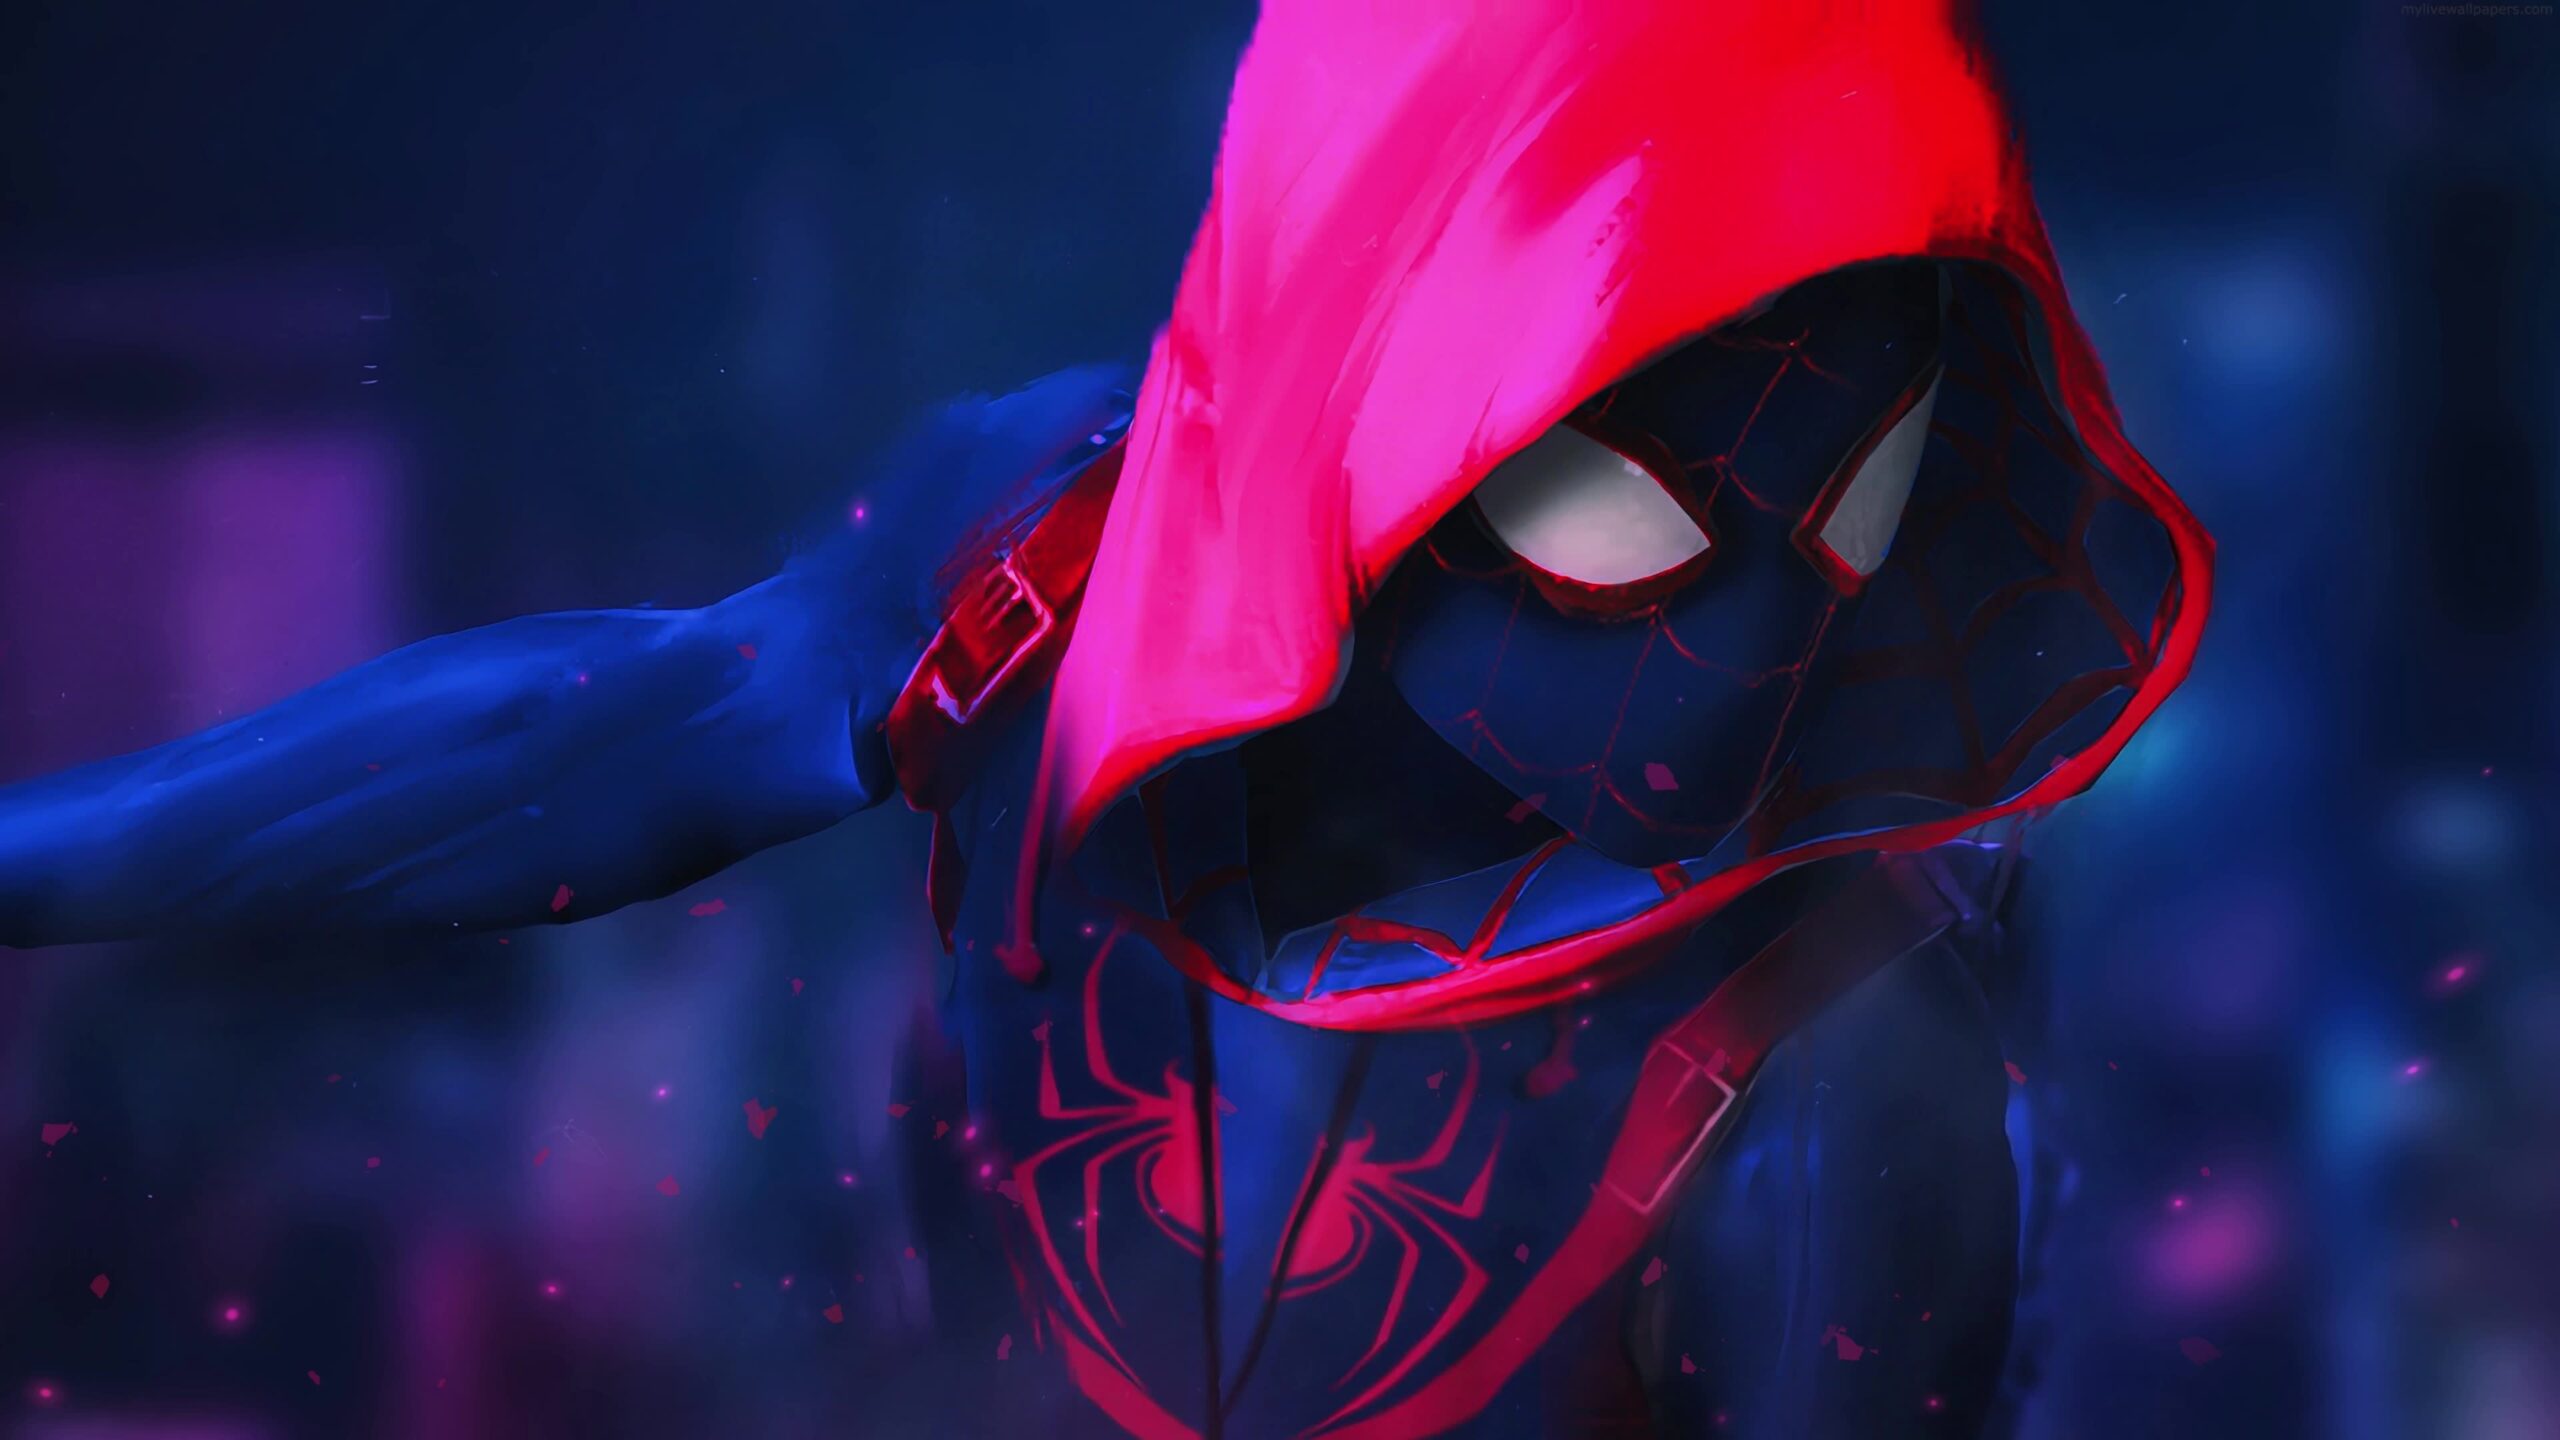 Marvel Spiderman With Hooded Suit 4K Live Wallpaper: Free HD 4K Live Wallpaper For Windows & MacOS